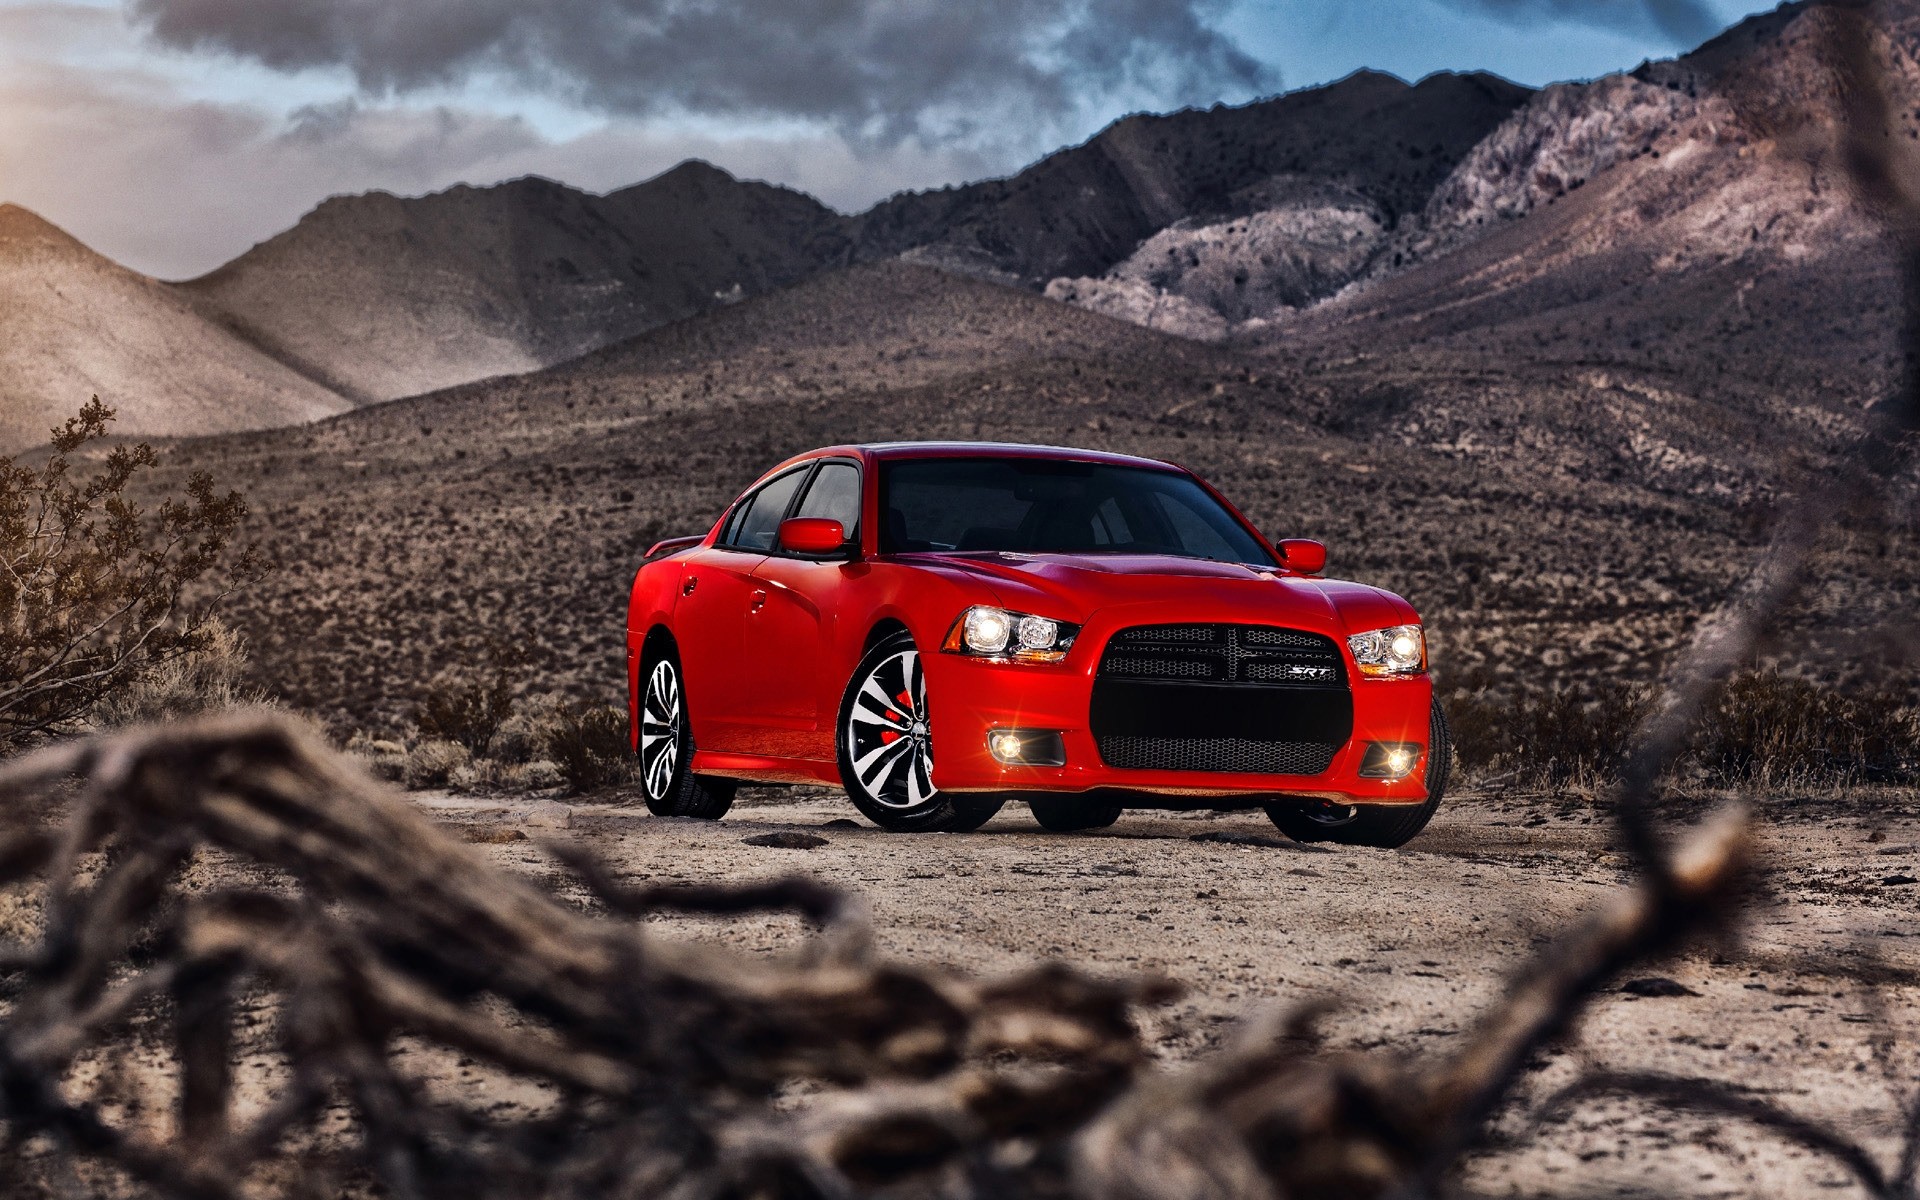 dodge desert car mountain travel sky landscape vehicle road hurry dodge charger muscle car